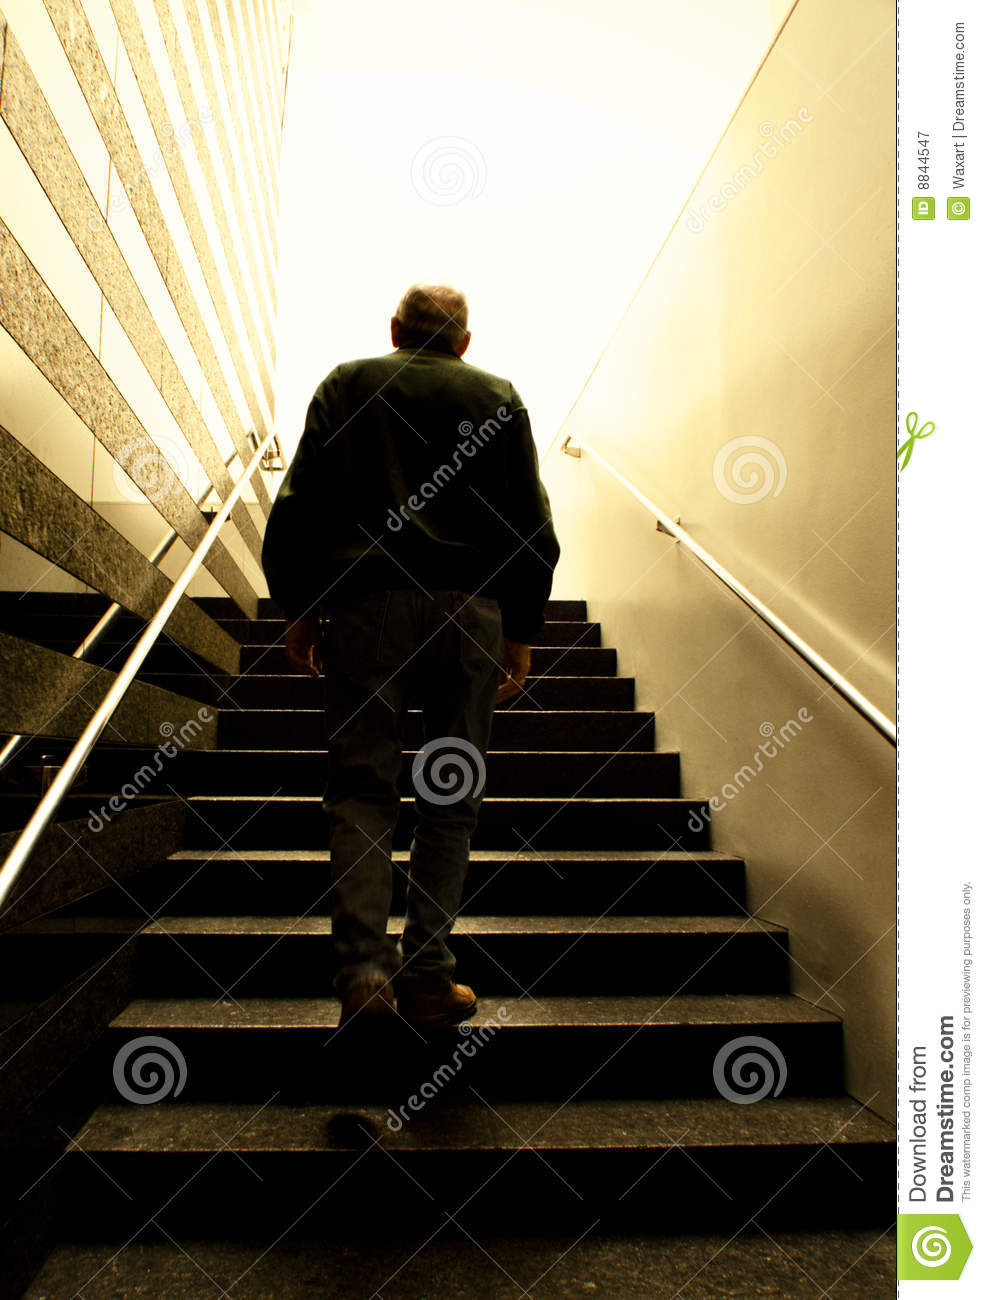 Old Man Climbing Stairs Into The Light Royalty Free Stock Photography